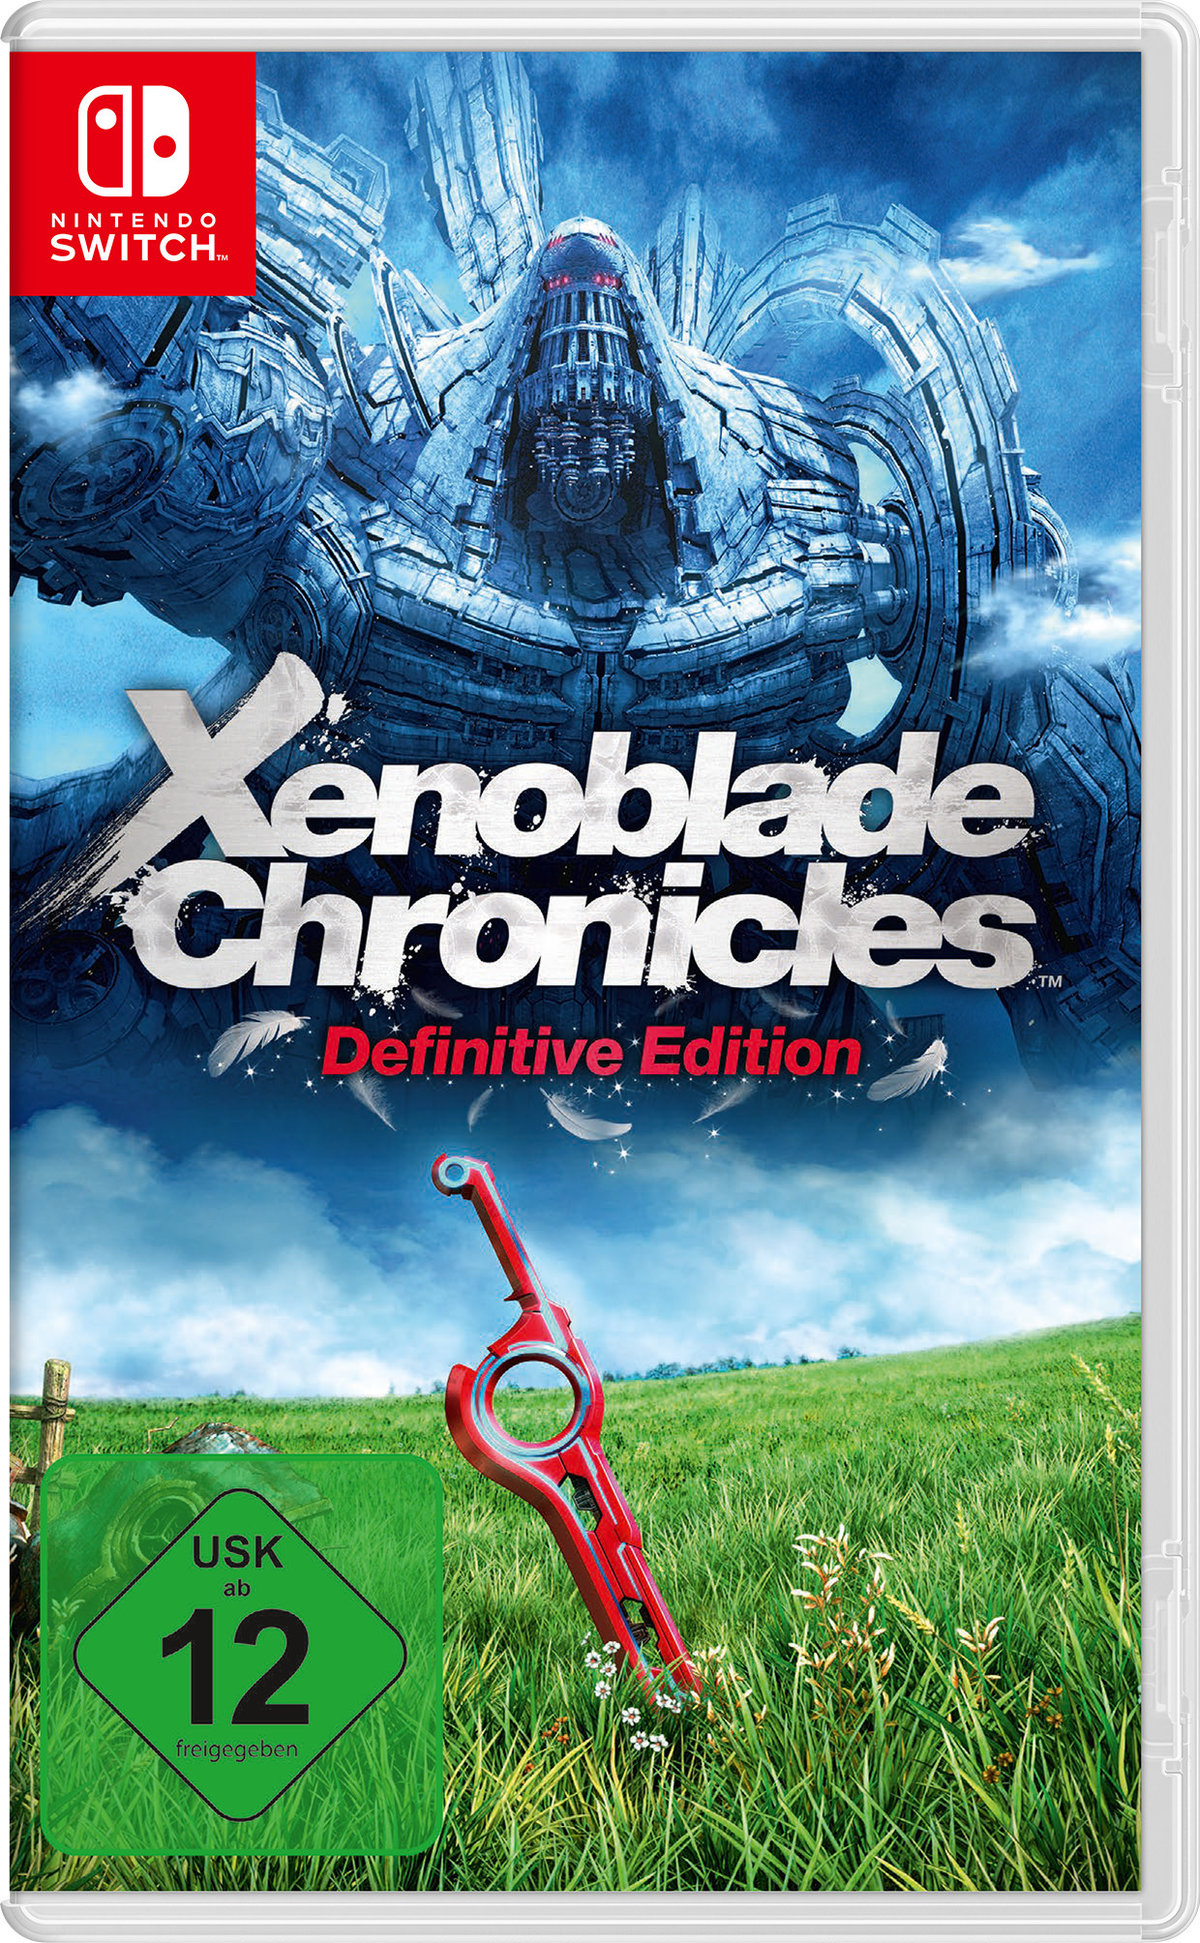 Switch] Edition Xenoblade - Chronicles: SWITCH [Nintendo Definitive